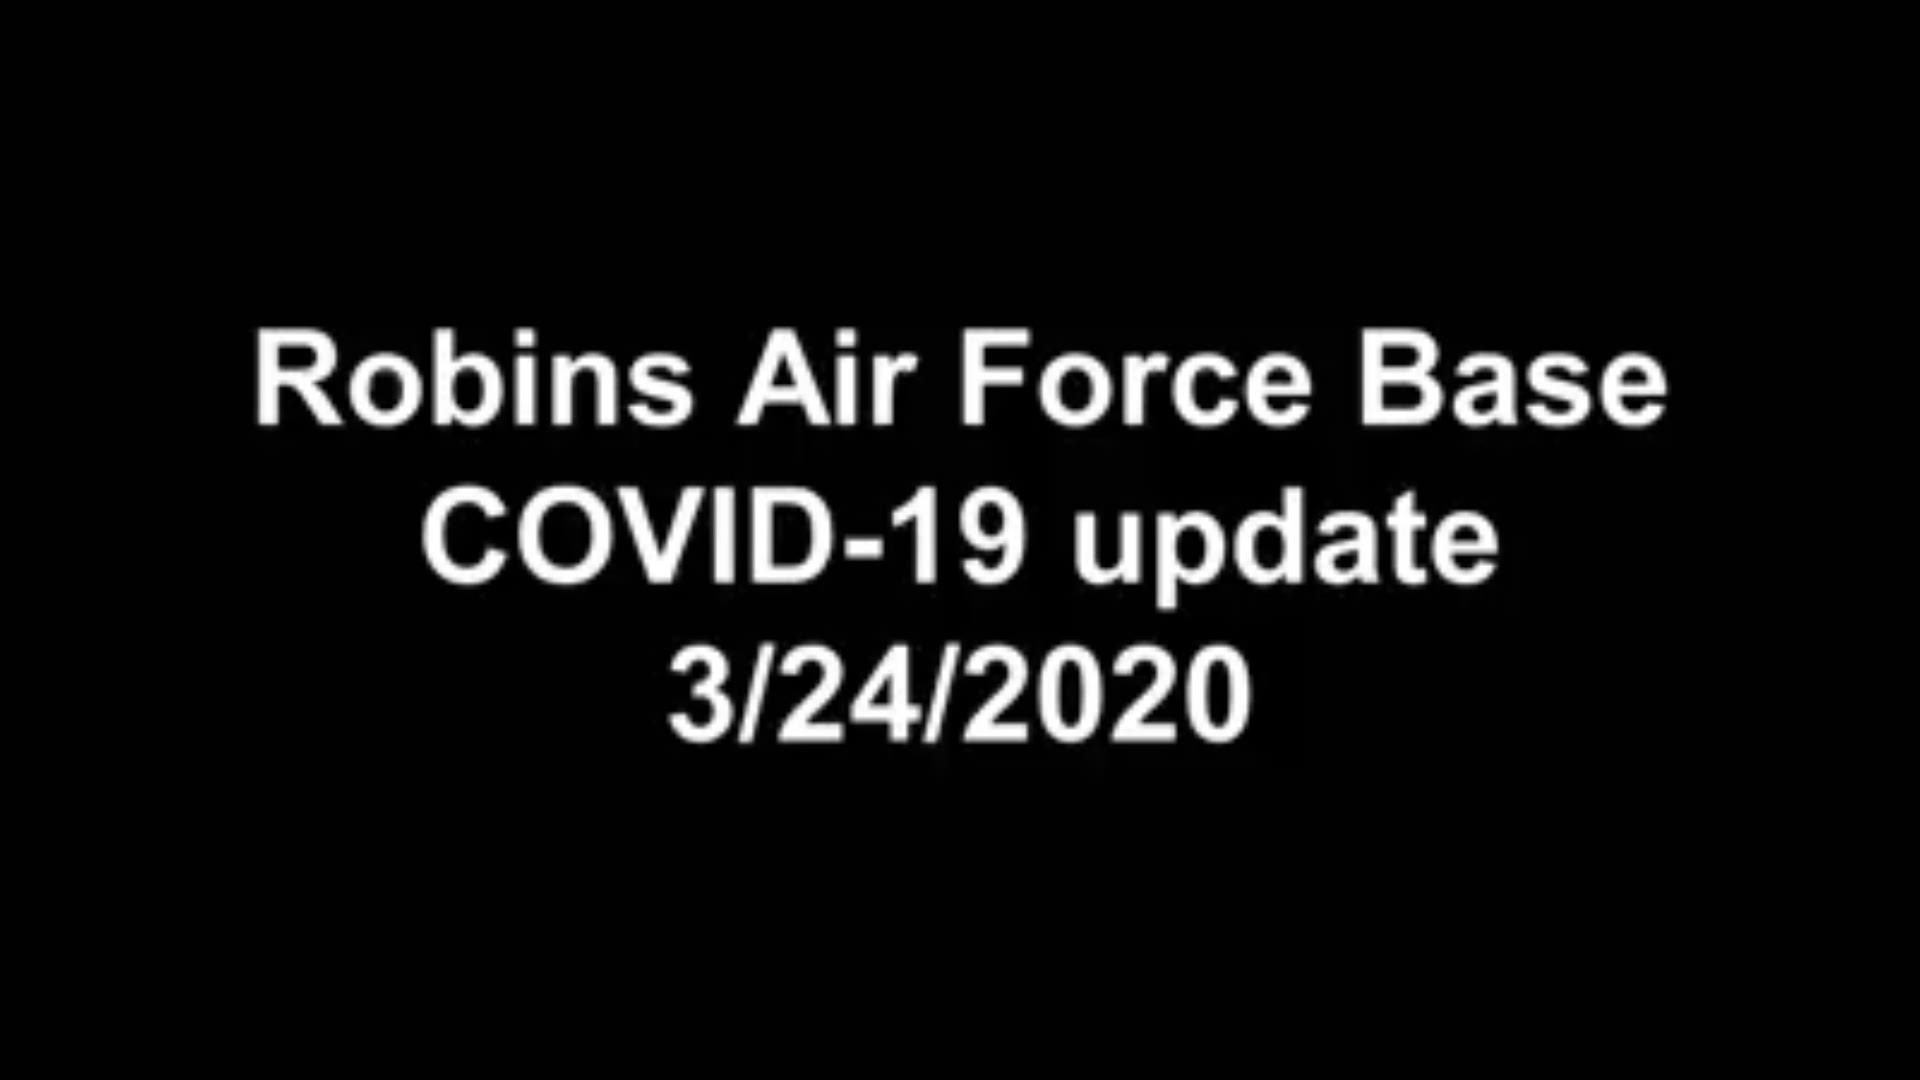 Robins Air Force Base sent out a video press release explaining its response to COVID-19